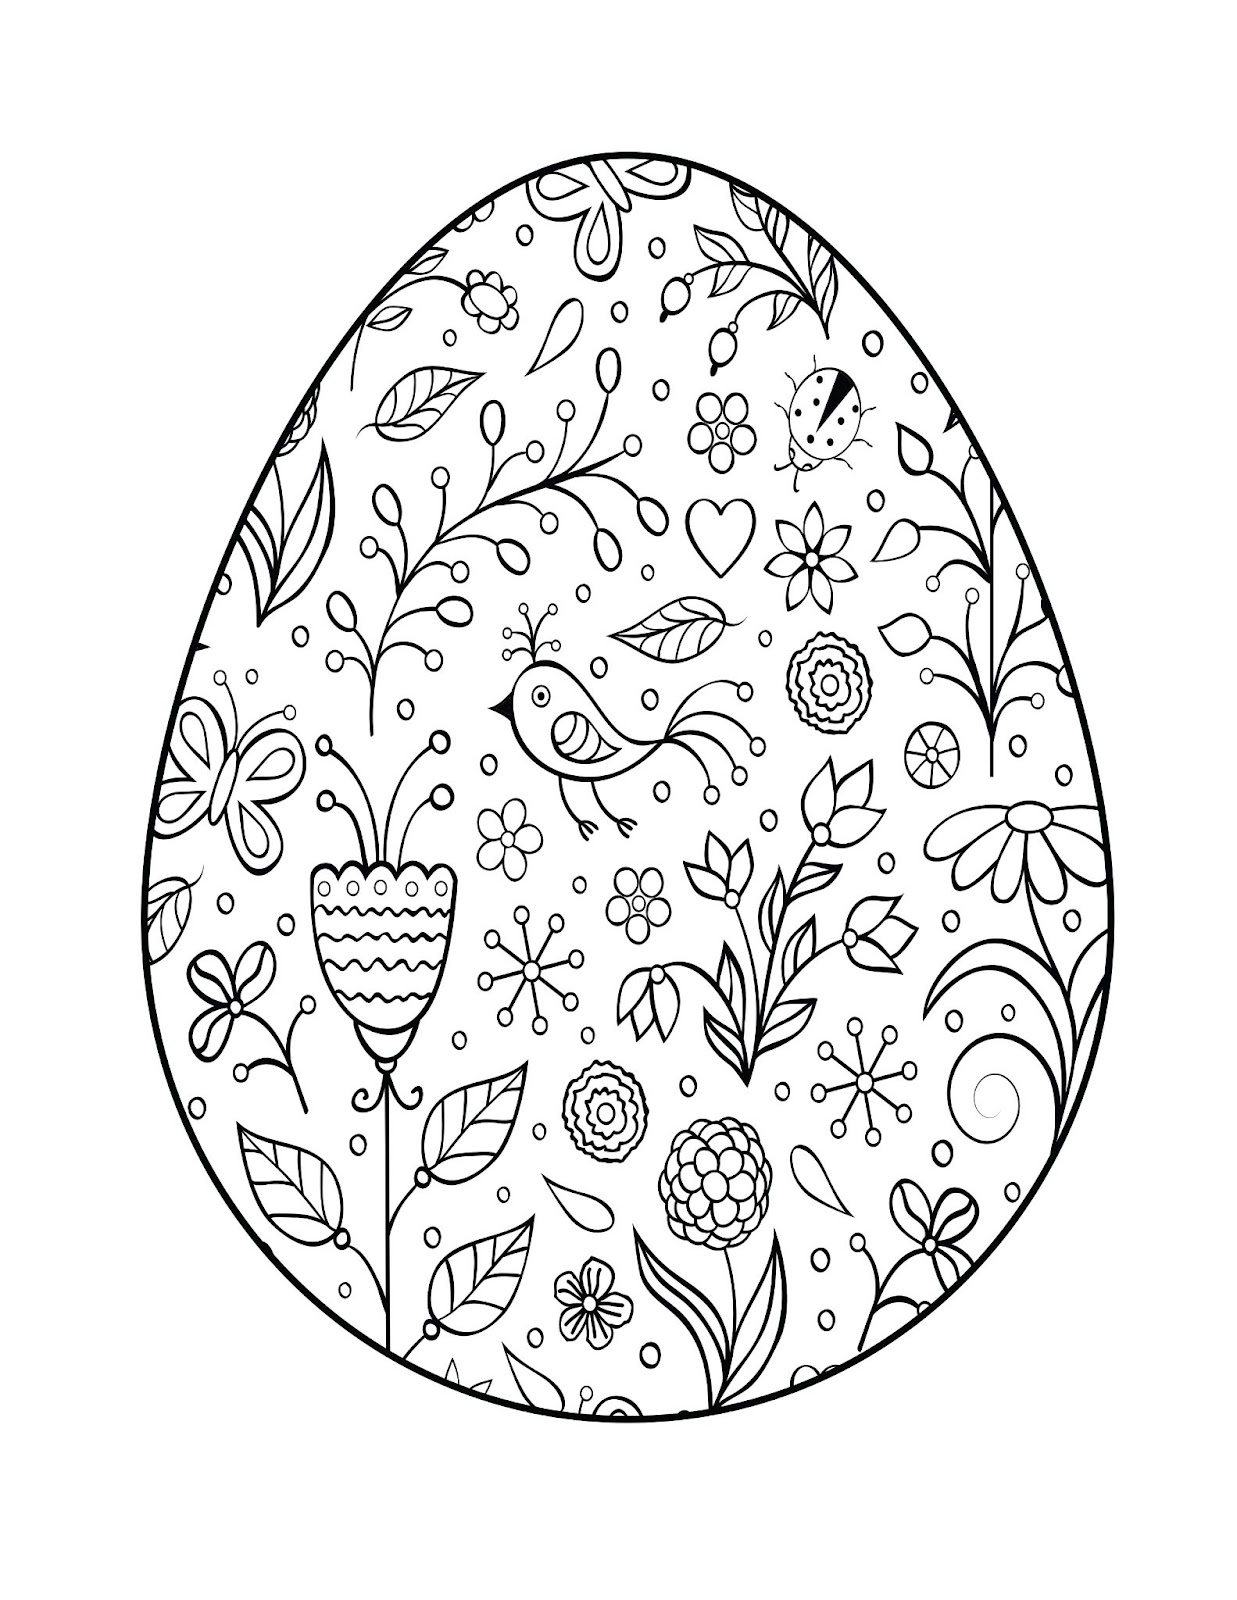 Flower garden eastern egg coloring page